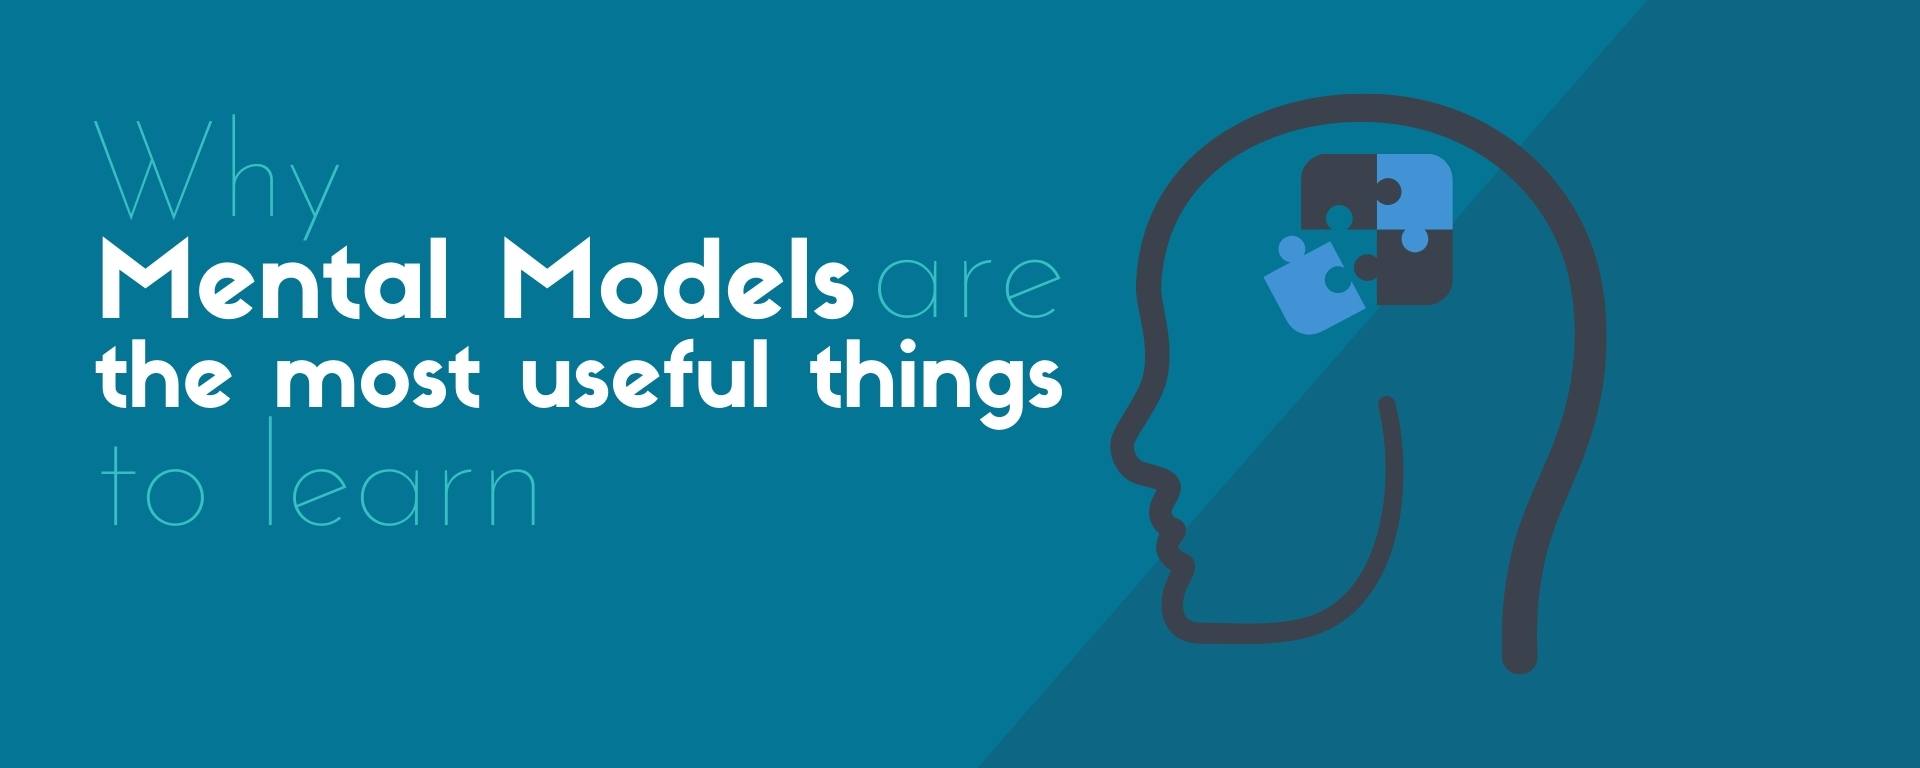 Why Mental Models Are The Most Useful Things to Learn